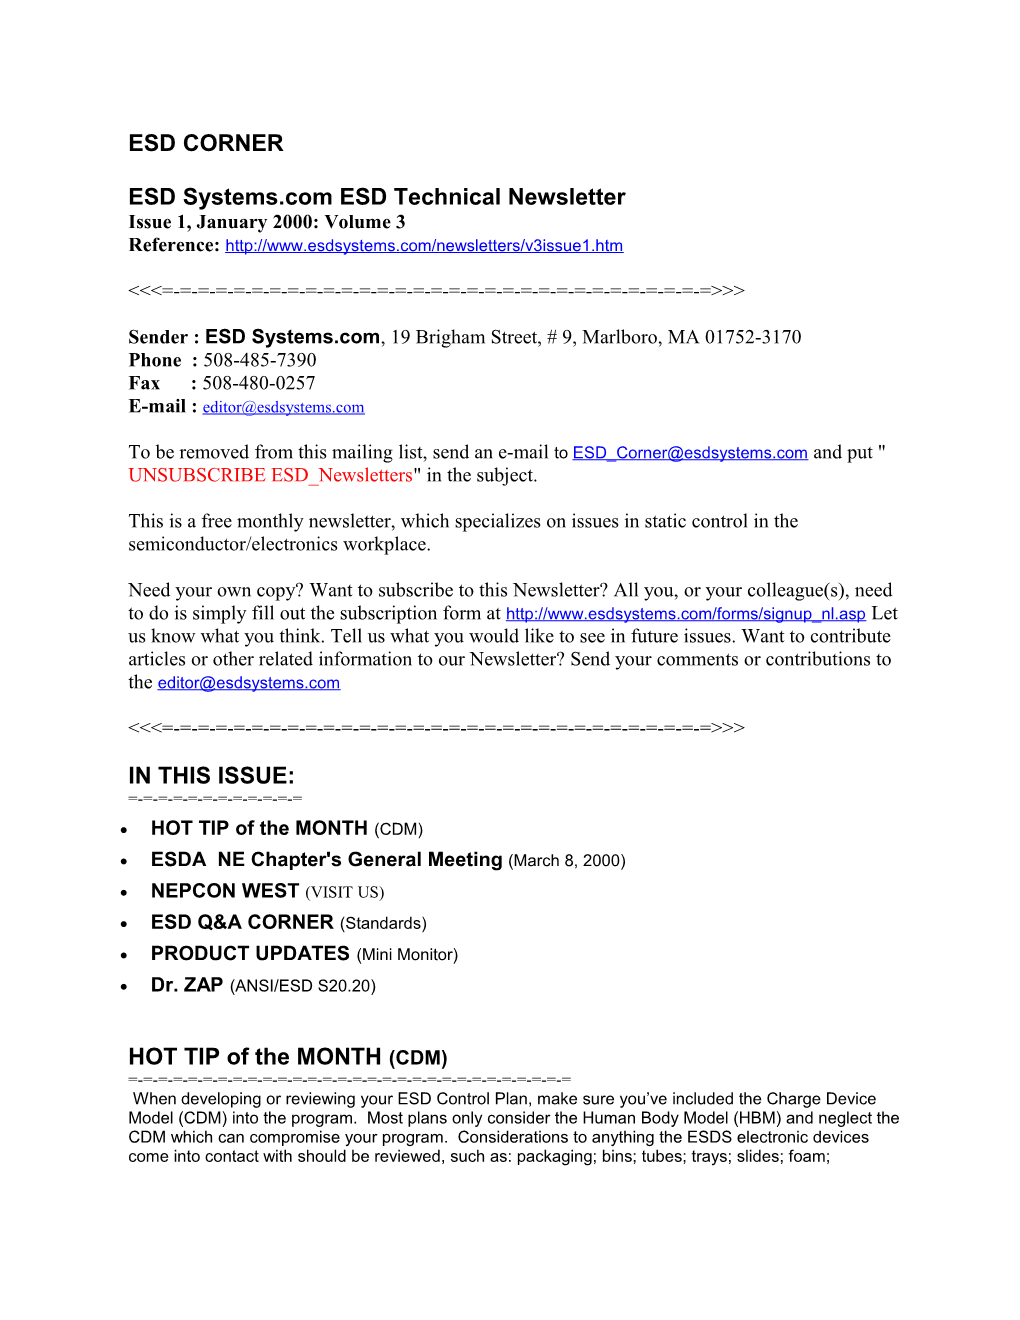 ESD CORNER ESD Systems.Com ESD Technical Newsletter Issue 1, January 2000: Volume 3 Reference